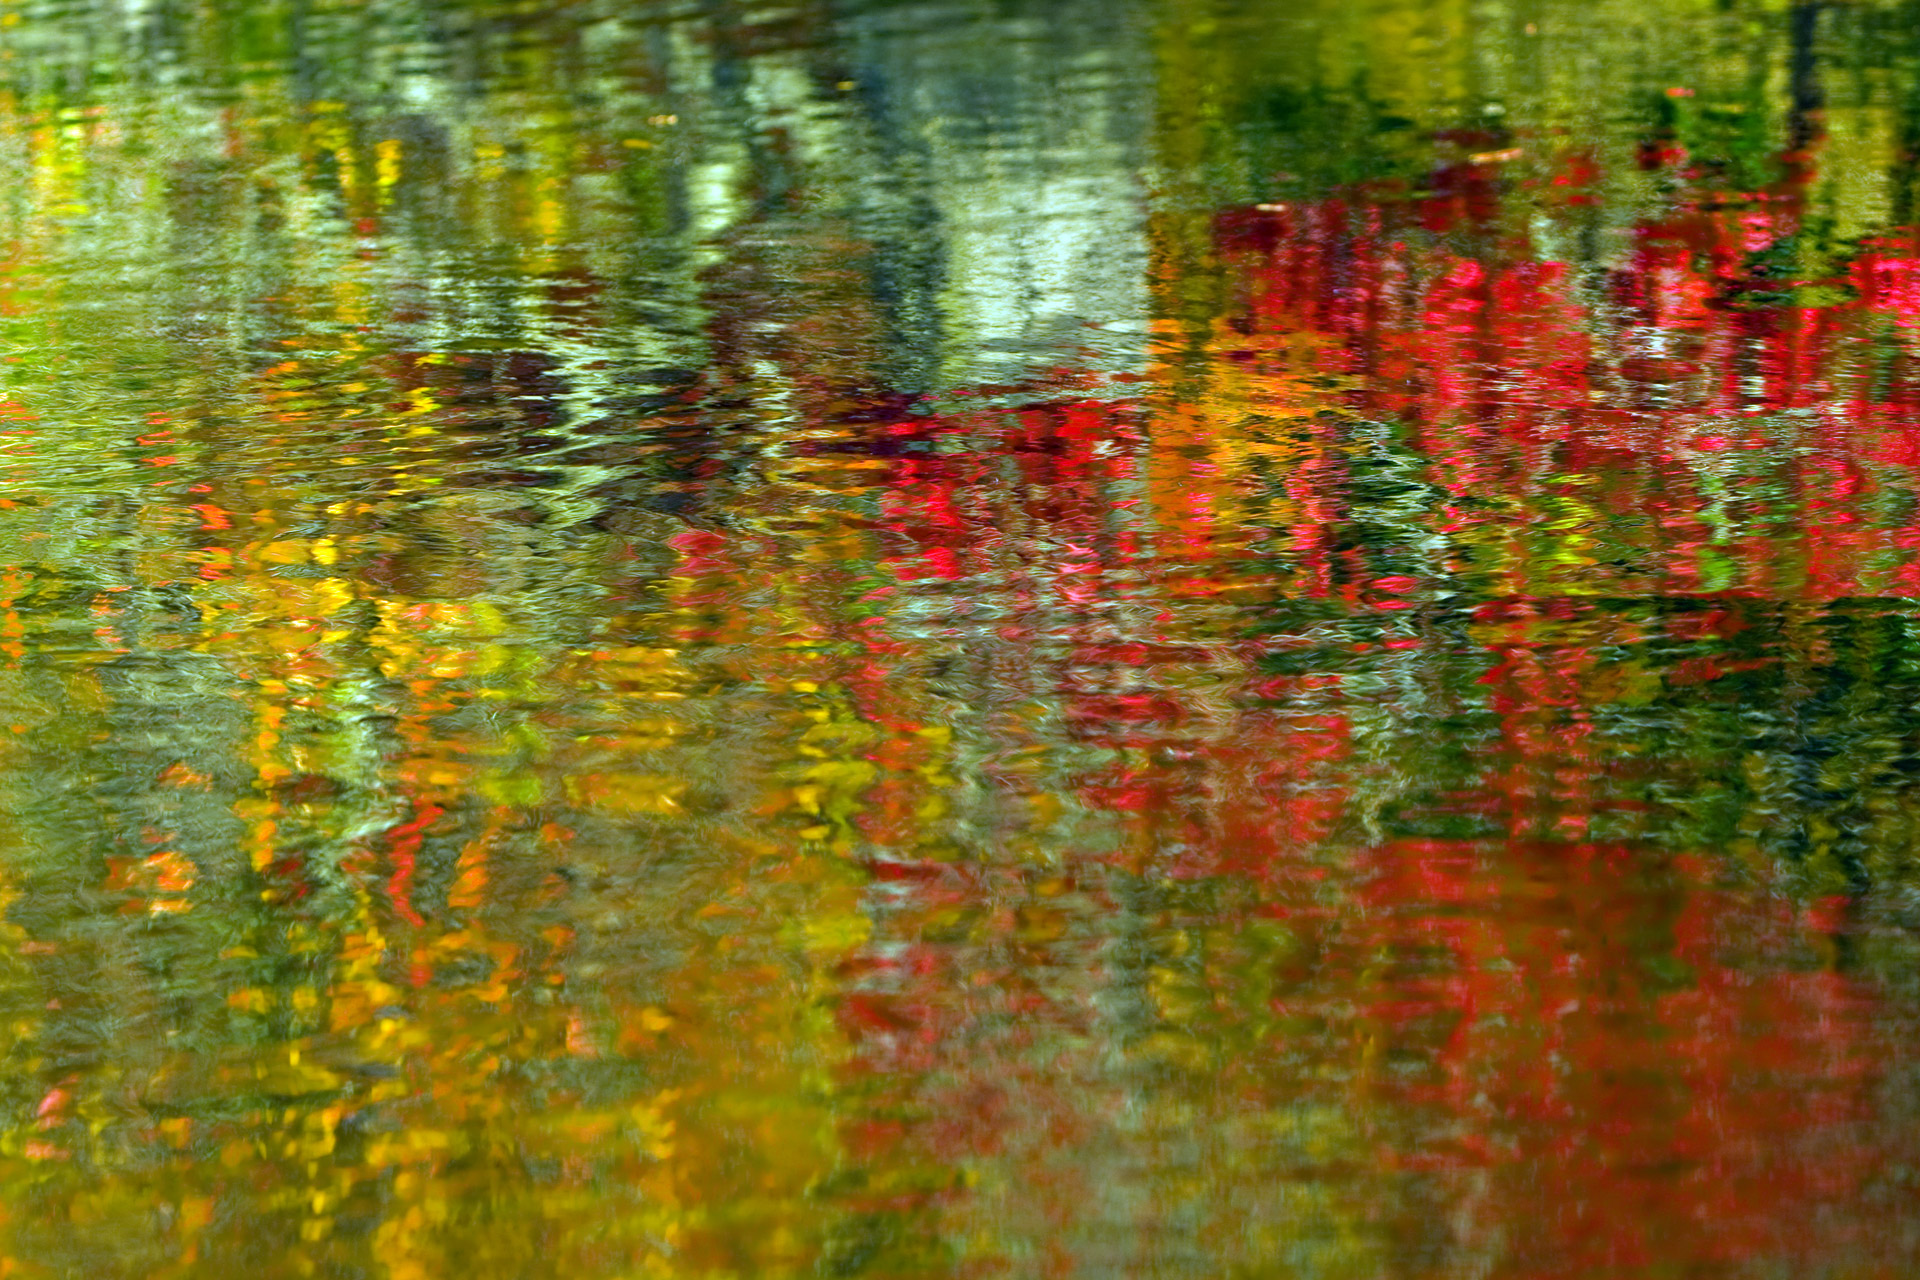 Colorful blurred abstract background of water in the autumn season